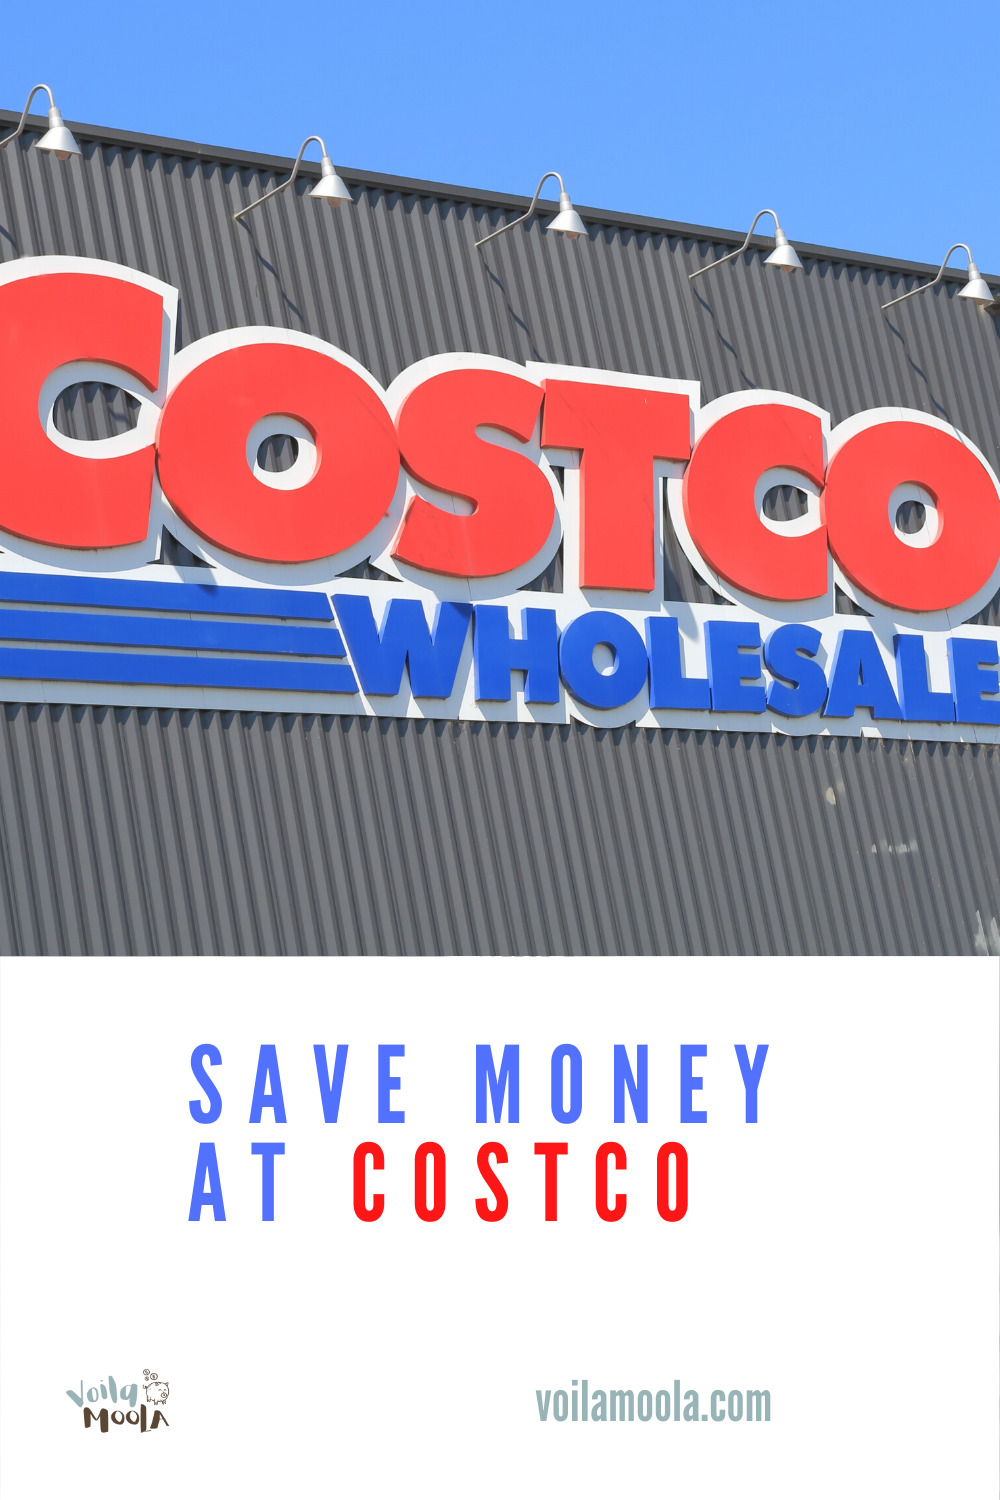 Saving money is important to all of us. Wholesale places like Costco are a great place to do it. Read this post to learn how you can save money shopping at costco. Easy tips! #savemoney #savemoneyatcostco #savemoneyongroceries #voilamoolablog